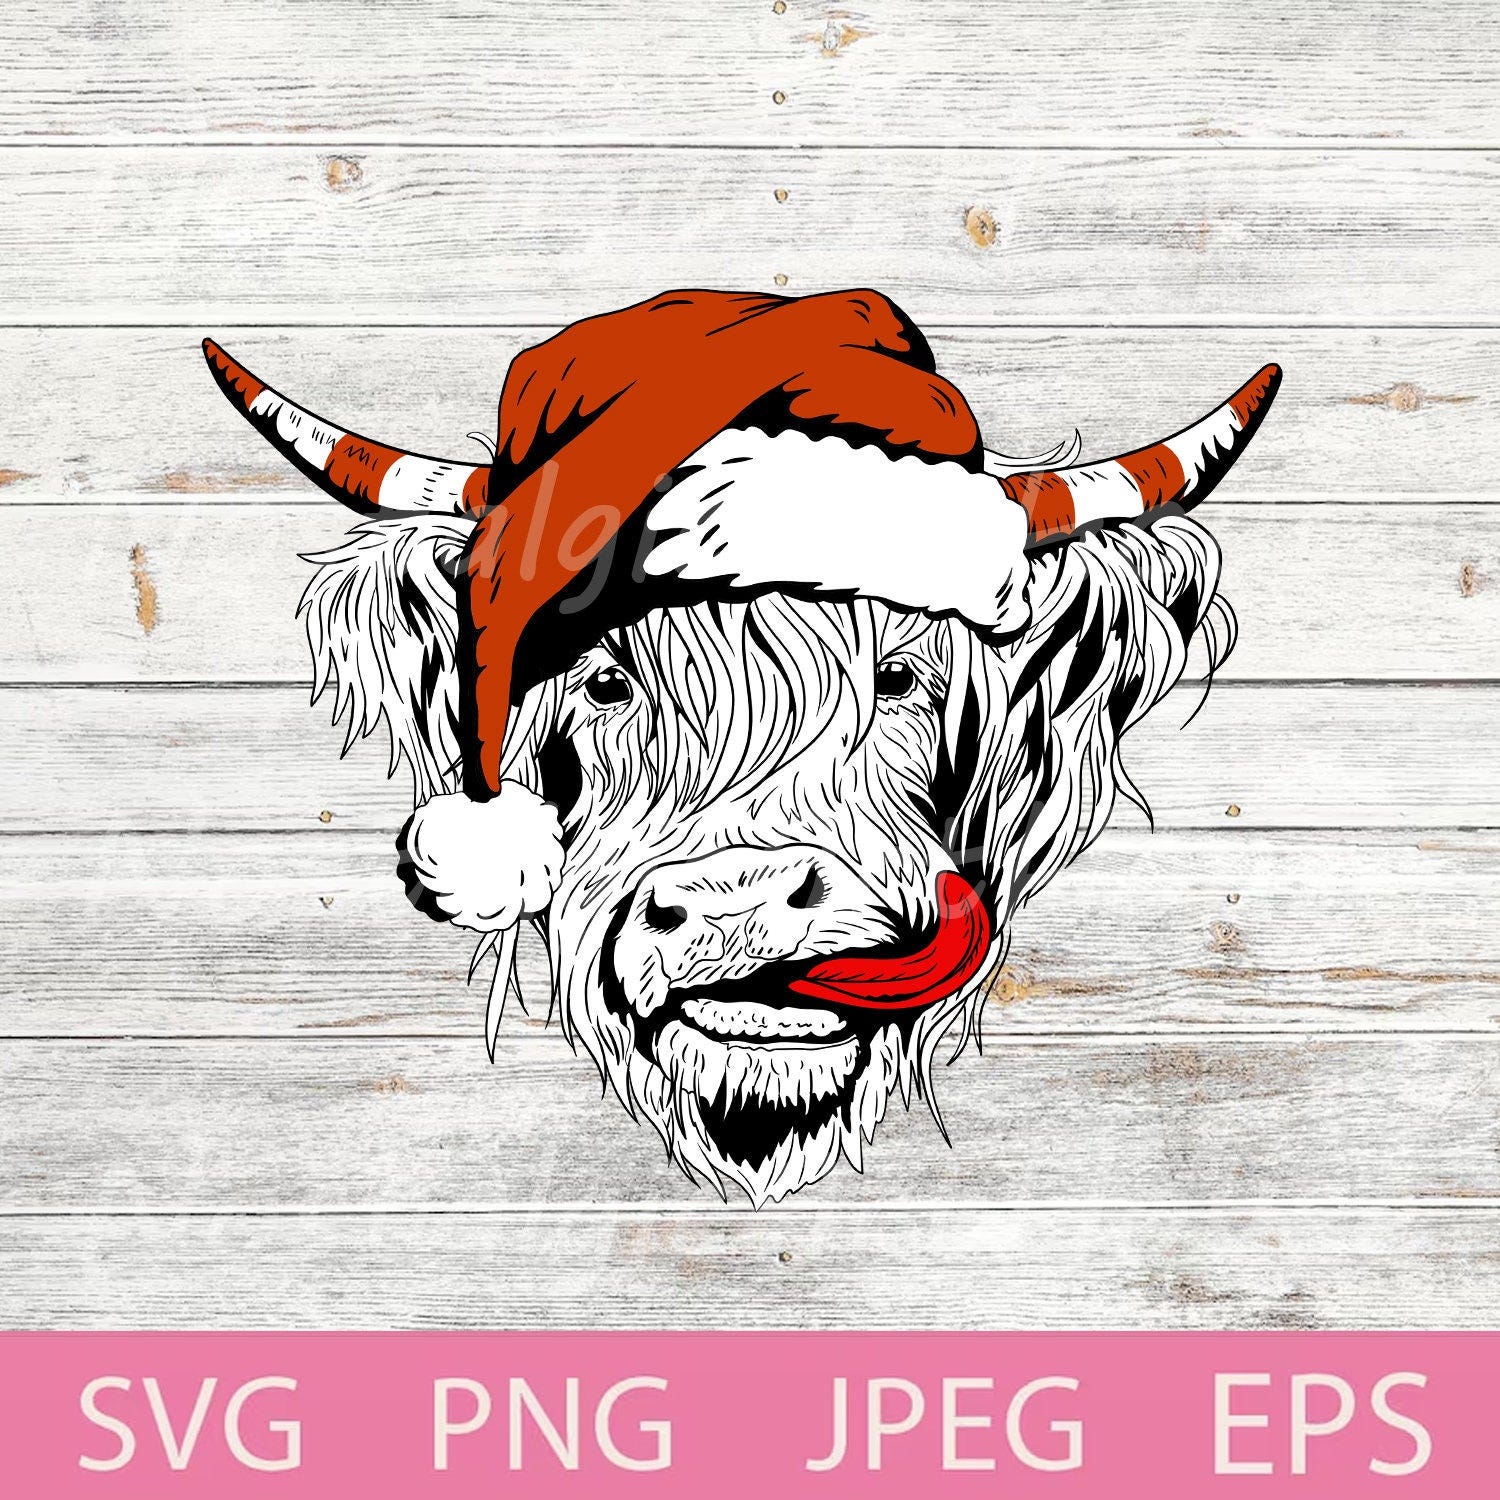 Christmas Cows Svg, Highland Cow Svg, Western Mooey Christmas, Retro Cow With Santa Hat, Cow Christmas, Holstein, Funny Cow XMas Png, Svg.